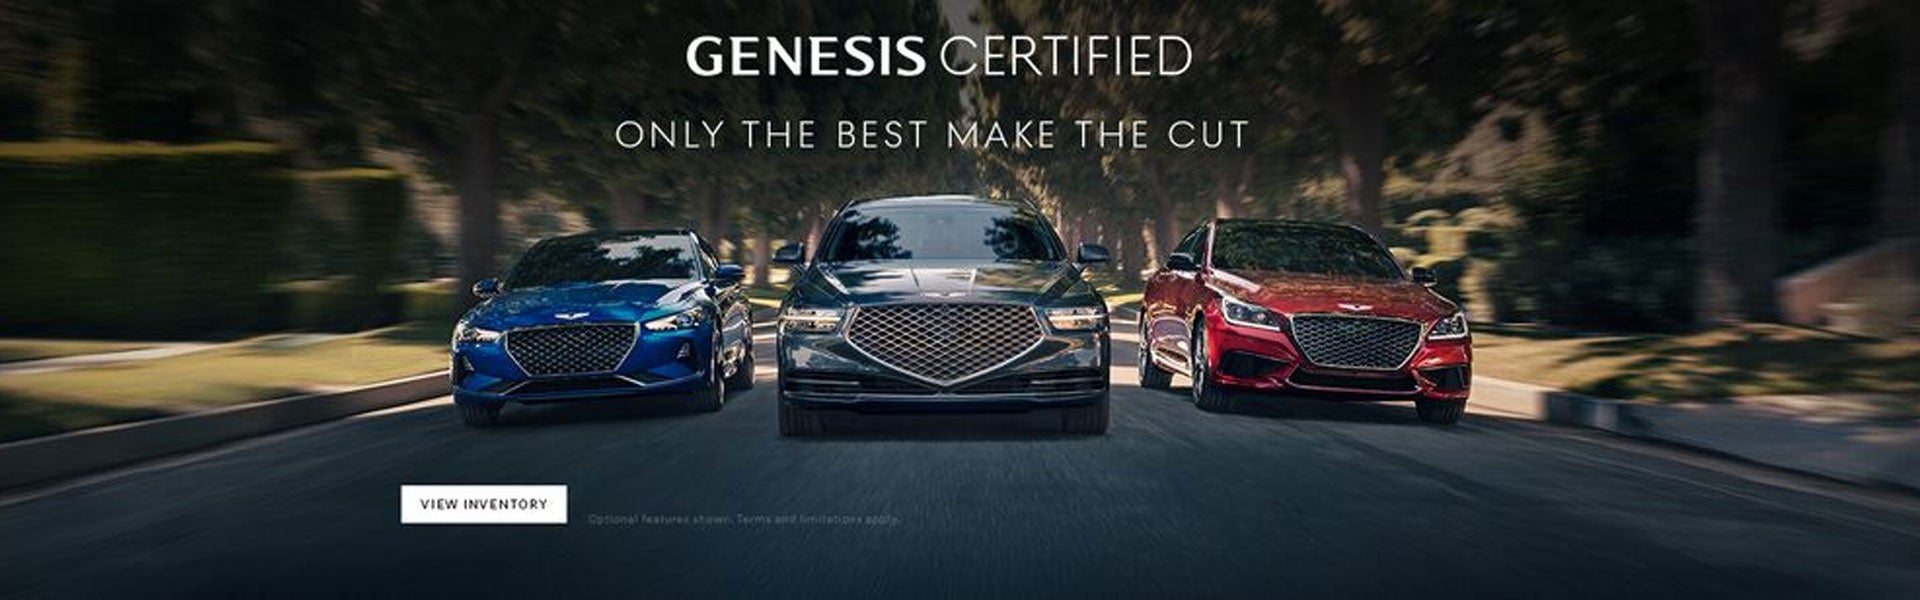 Genesis Certified - Only the Best make the Cut